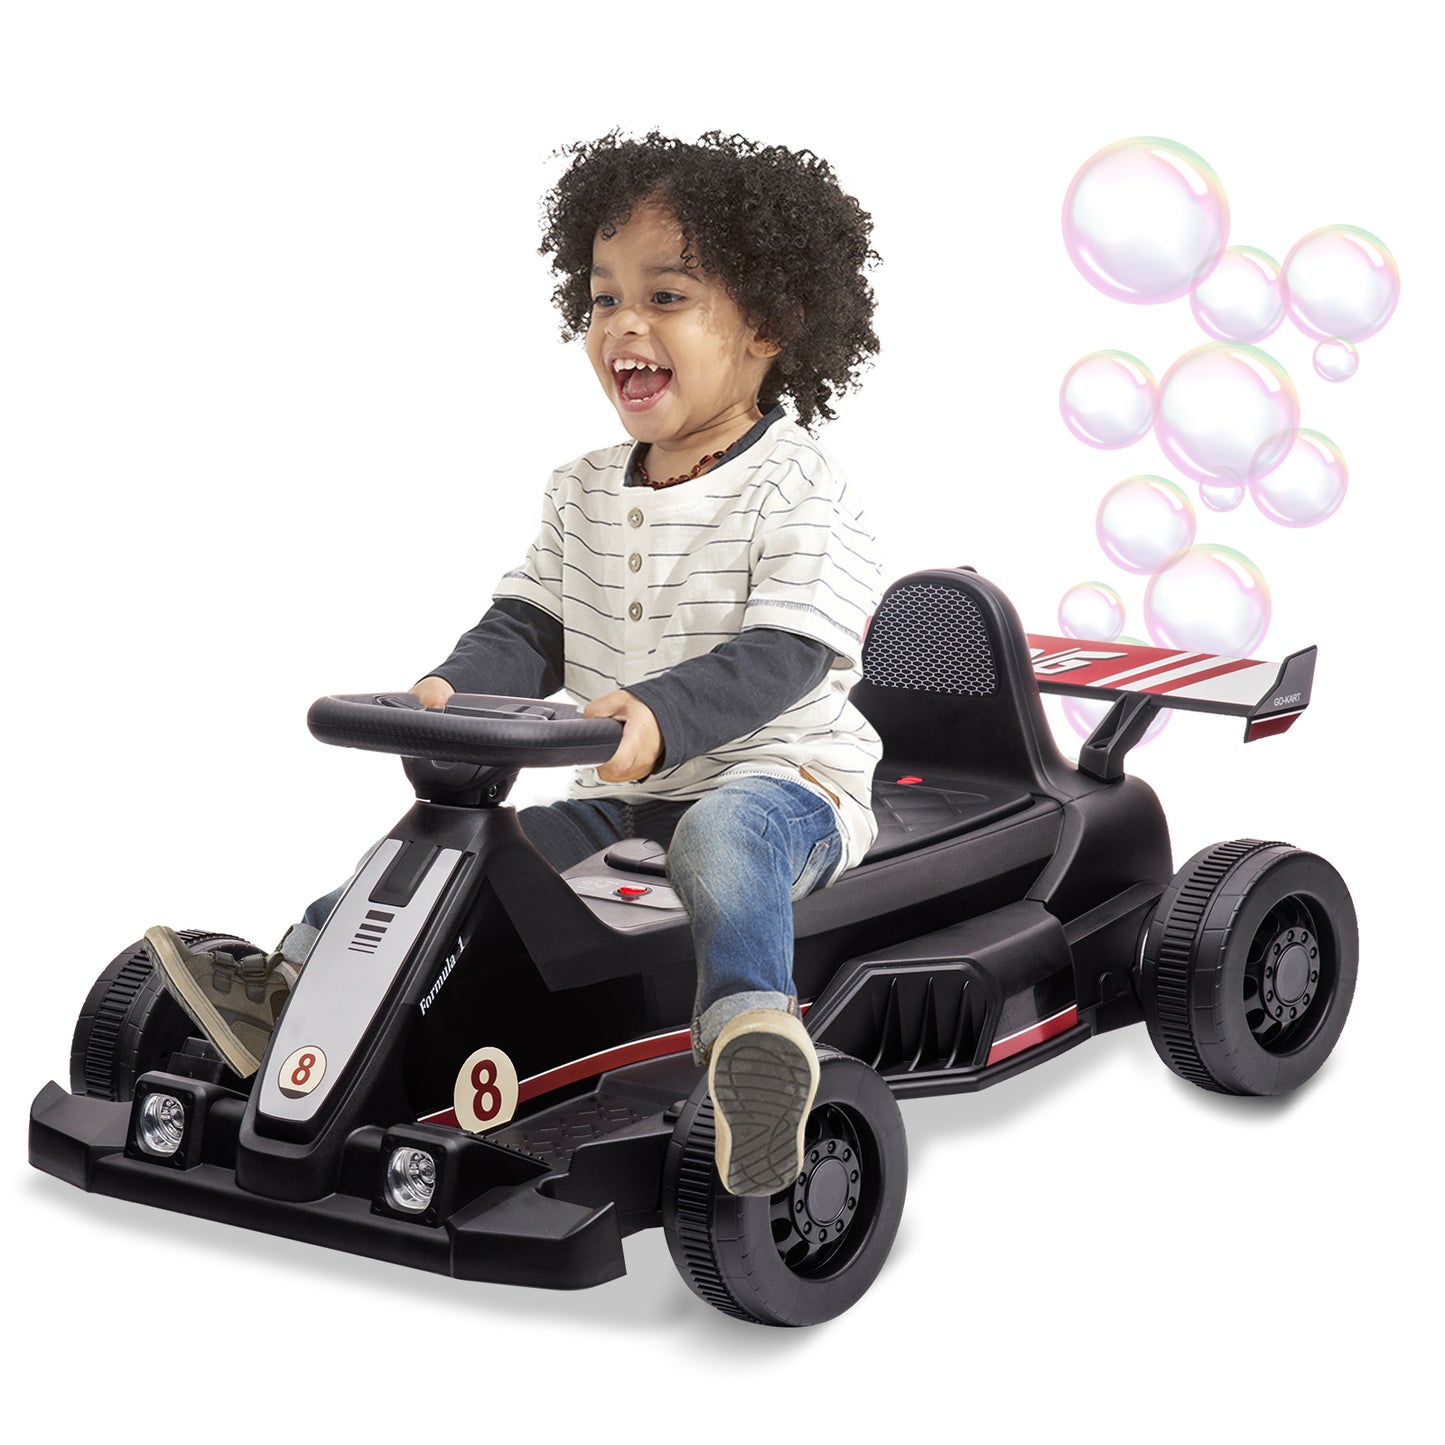 SYNGAR Power Ride on Toys for Kids, 6 V Electric Car with Bubble Function, Battery Electric Ride On Vehicle Toy for Boys Girls, Black